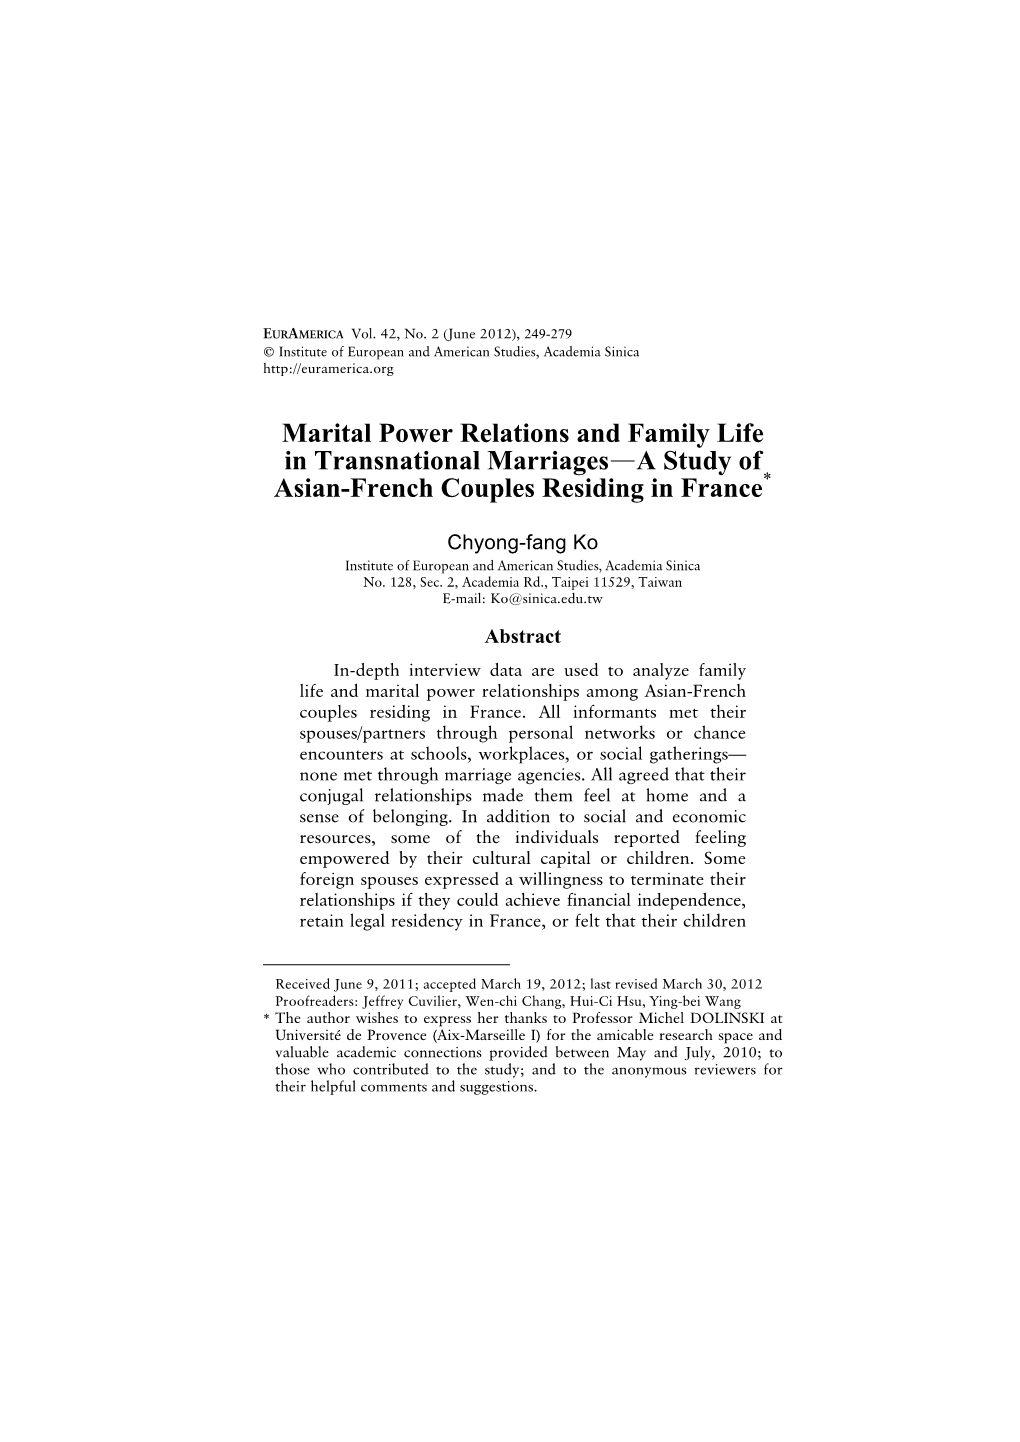 Marital Power Relations and Family Life in Transnational Marriages—A